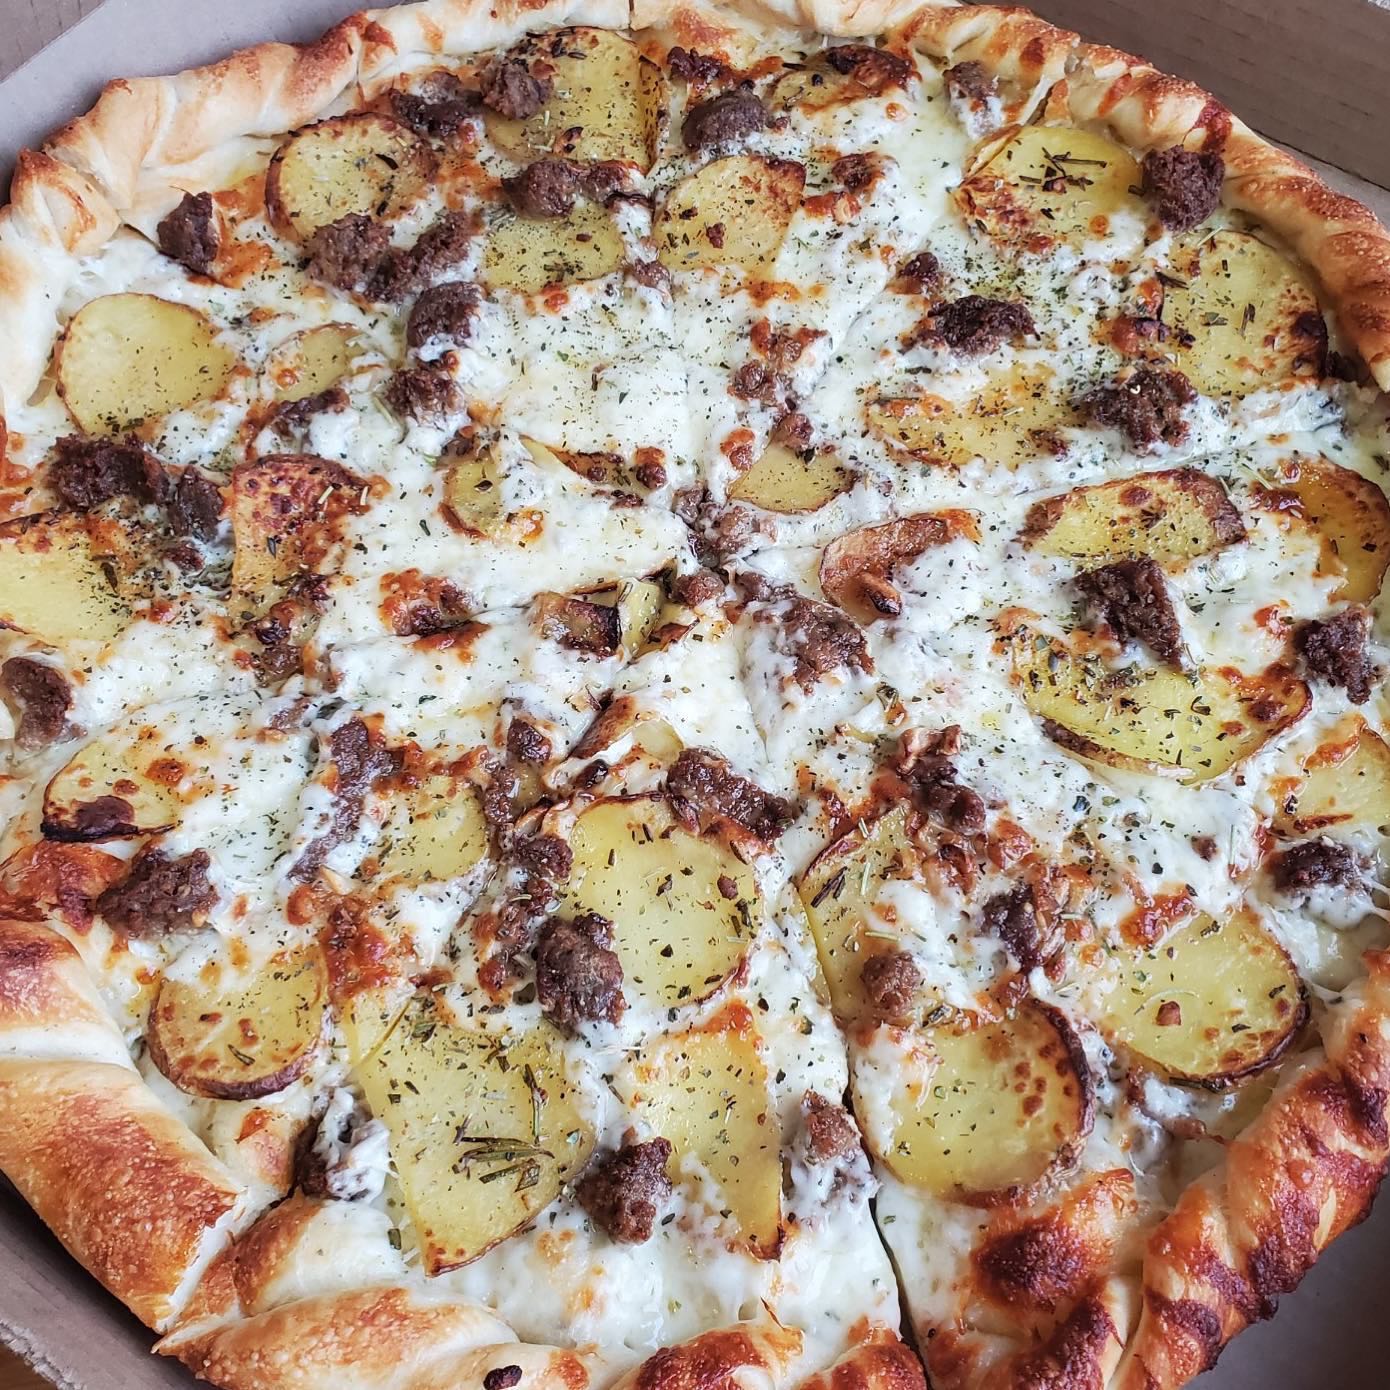 Cheesy pizza with potatoes and sausage